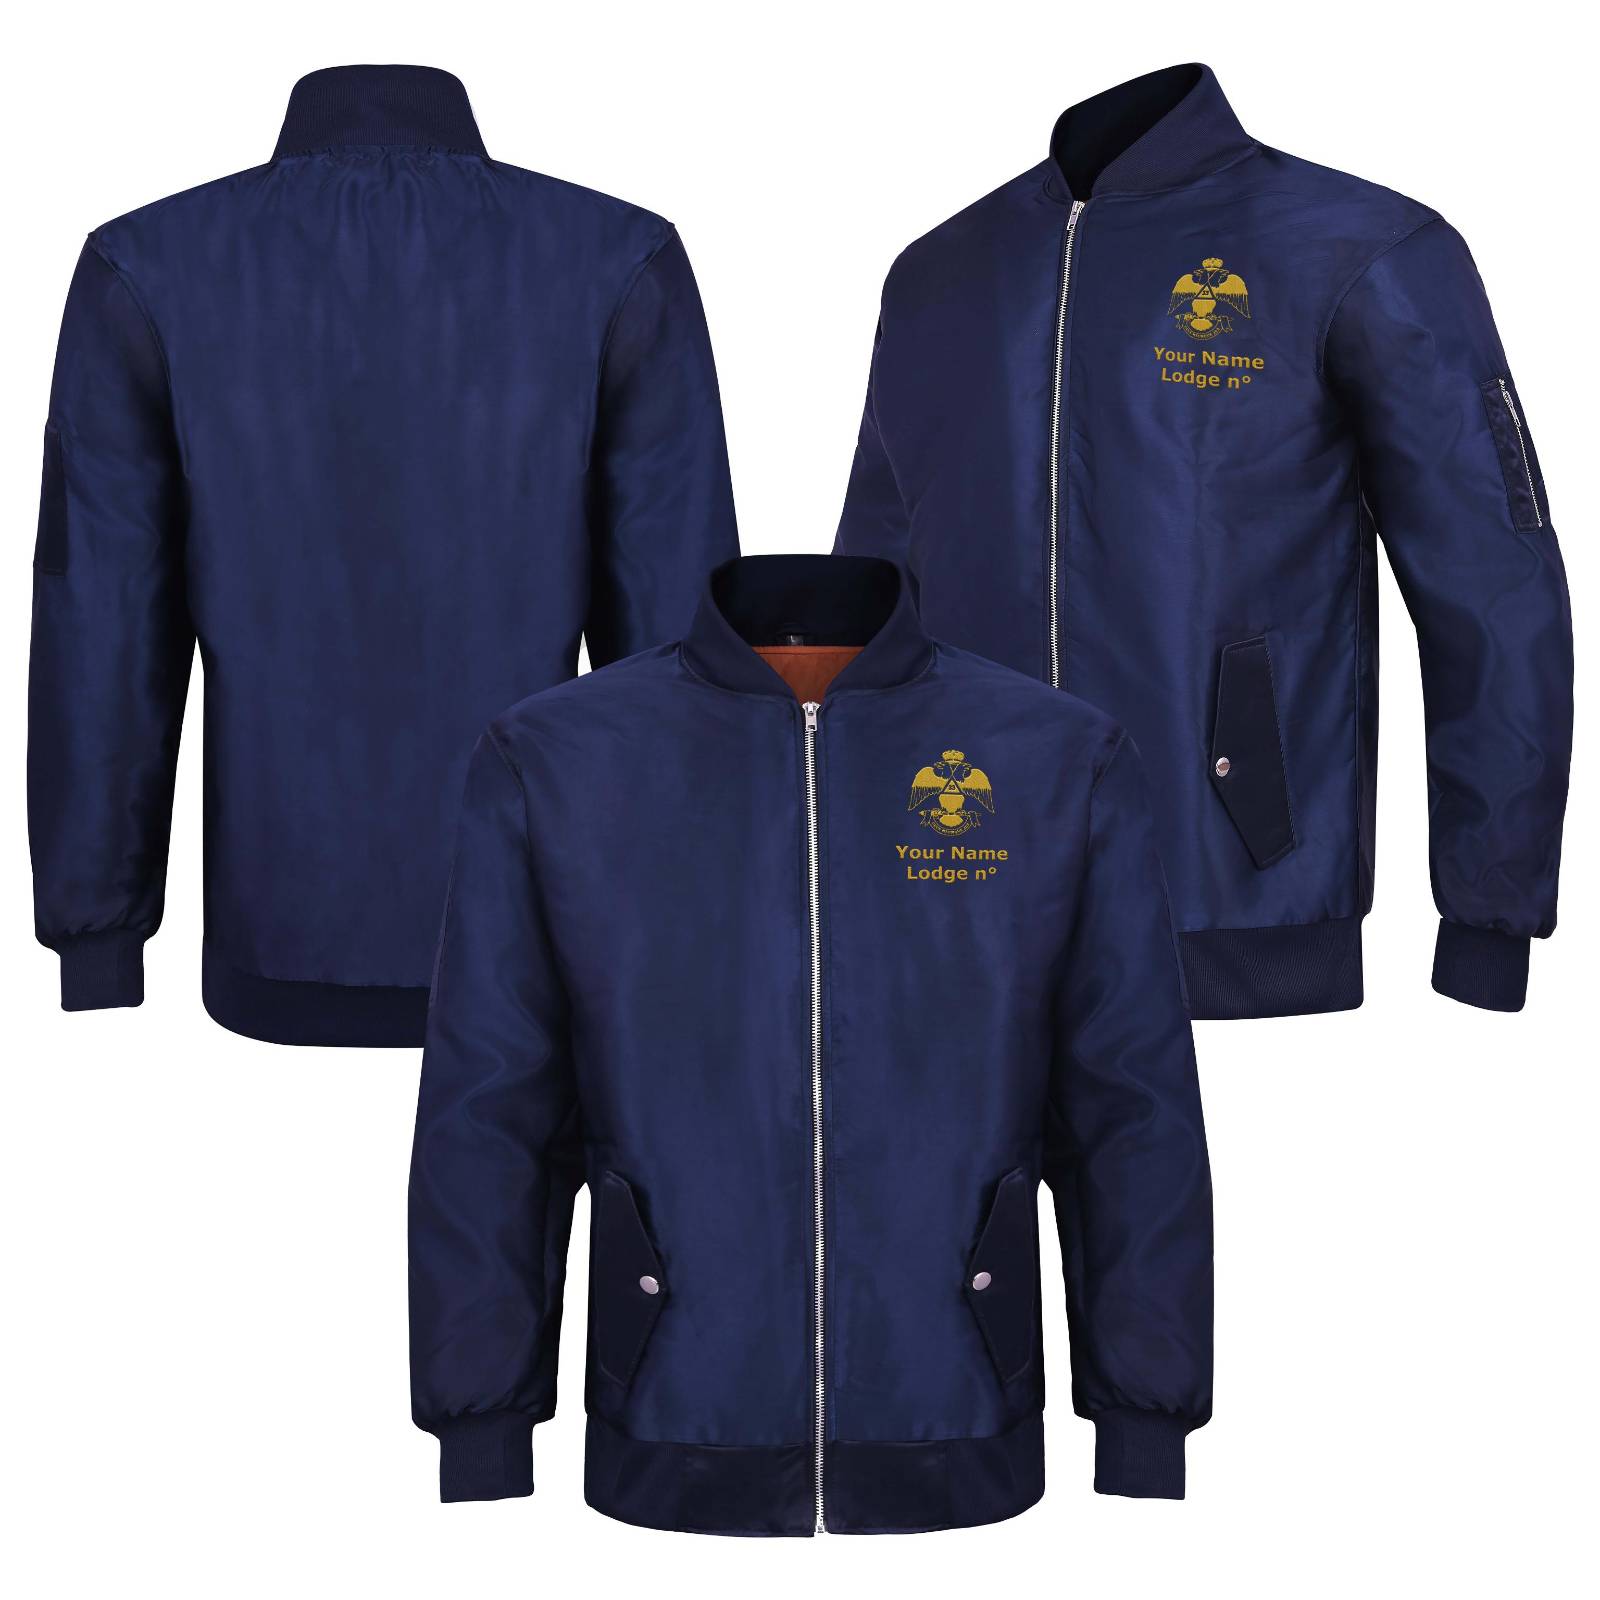 33rd Degree Scottish Rite Jacket - Wings Down Nylon Blue Color With Gold Embroidery - Bricks Masons